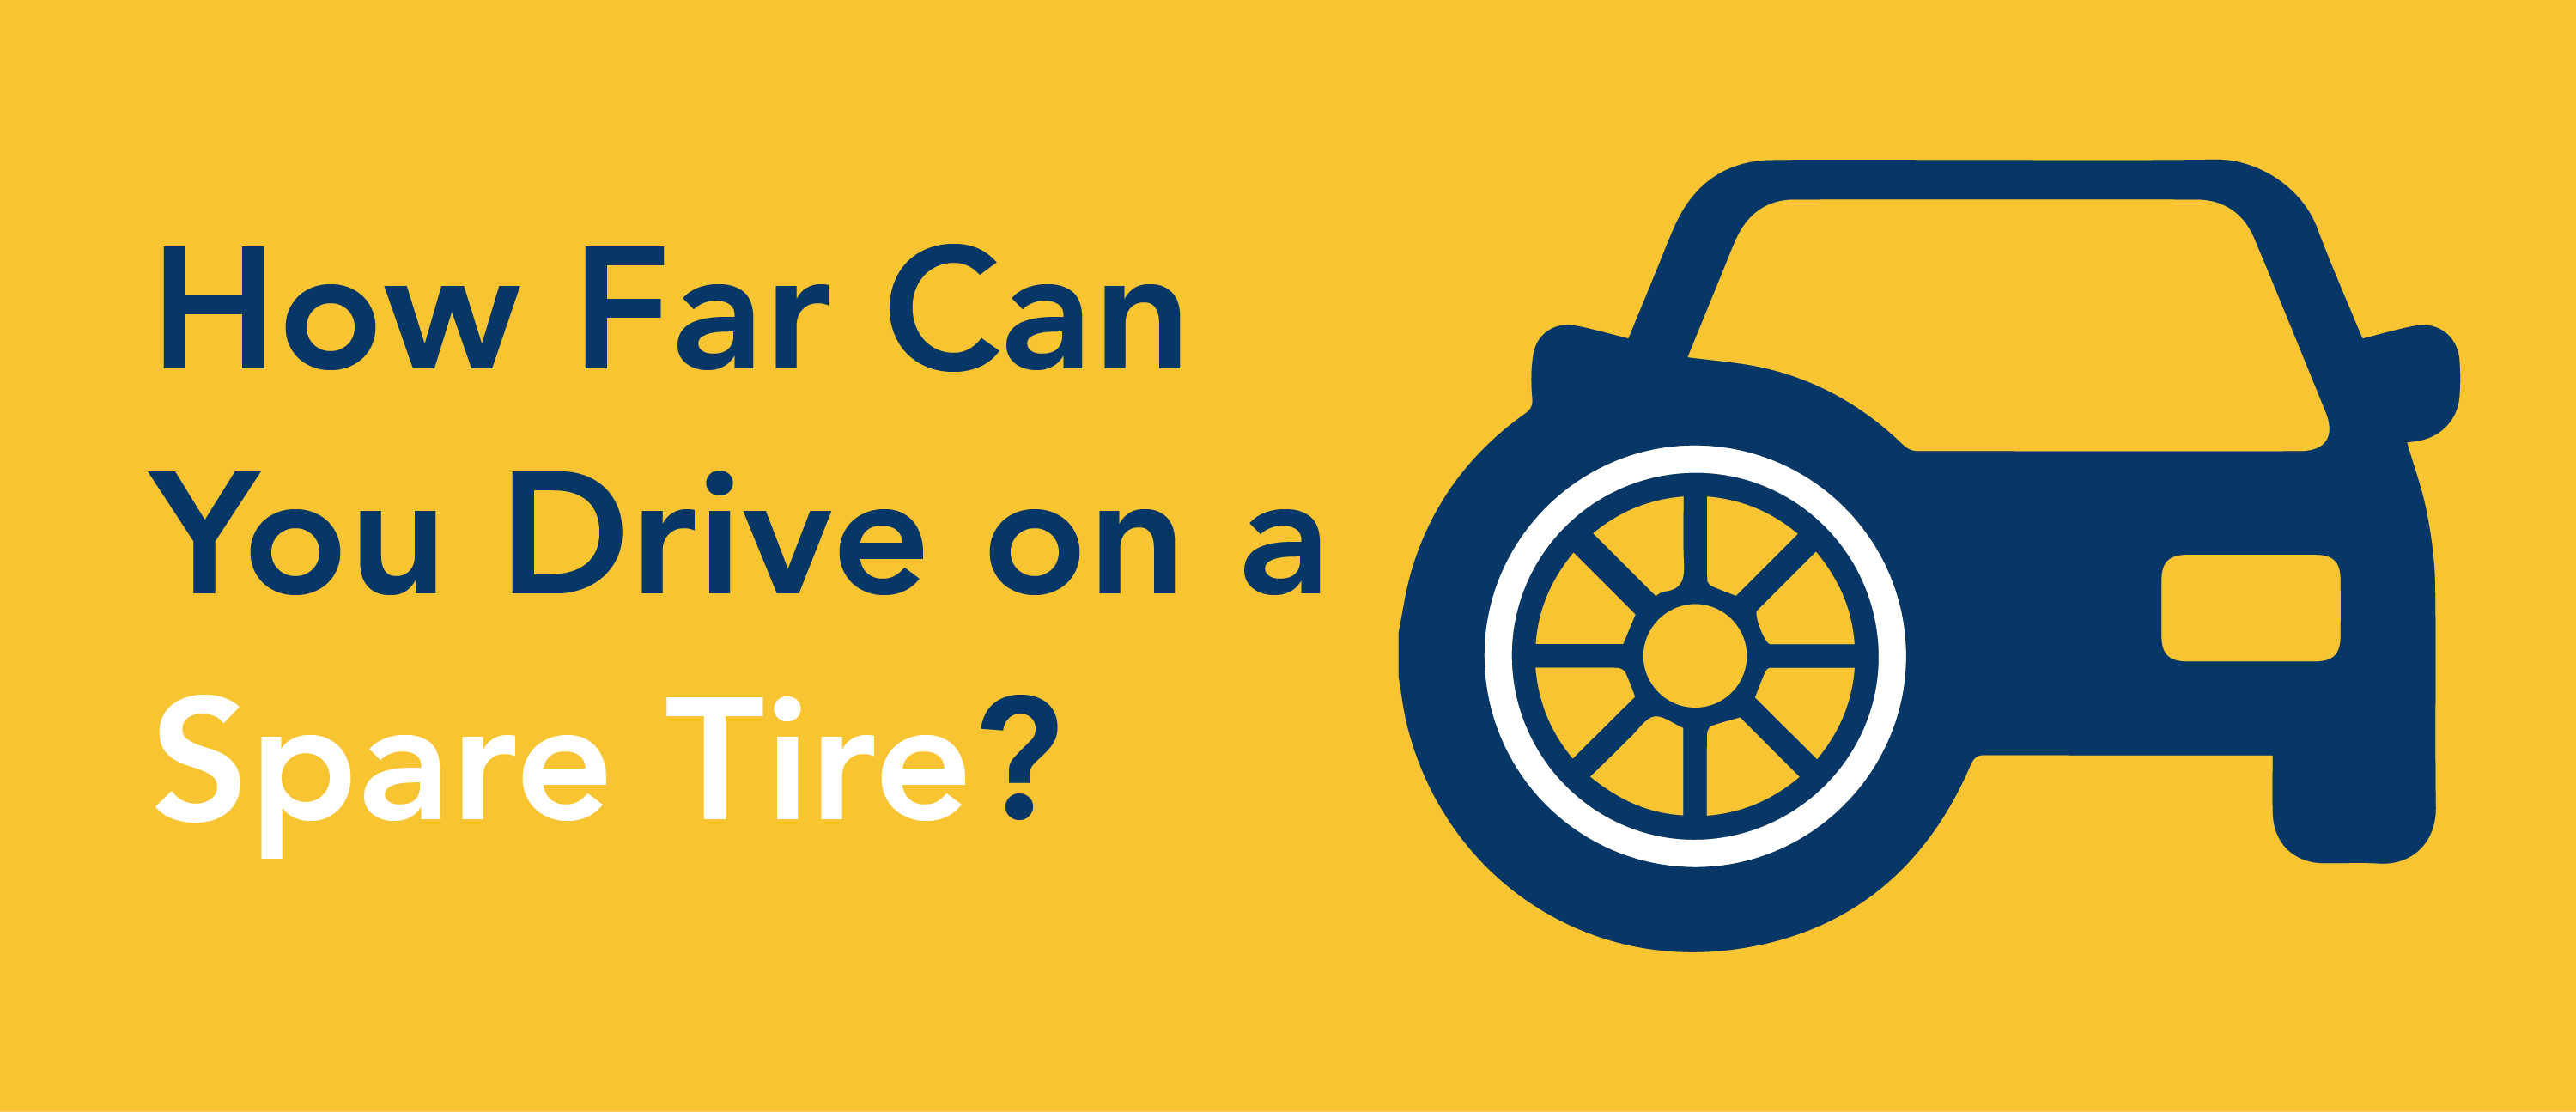 If you have a flat, you may wonder how far you can drive on your spare tire. Here, we answer that and tell you how to remain safe while using your spare.